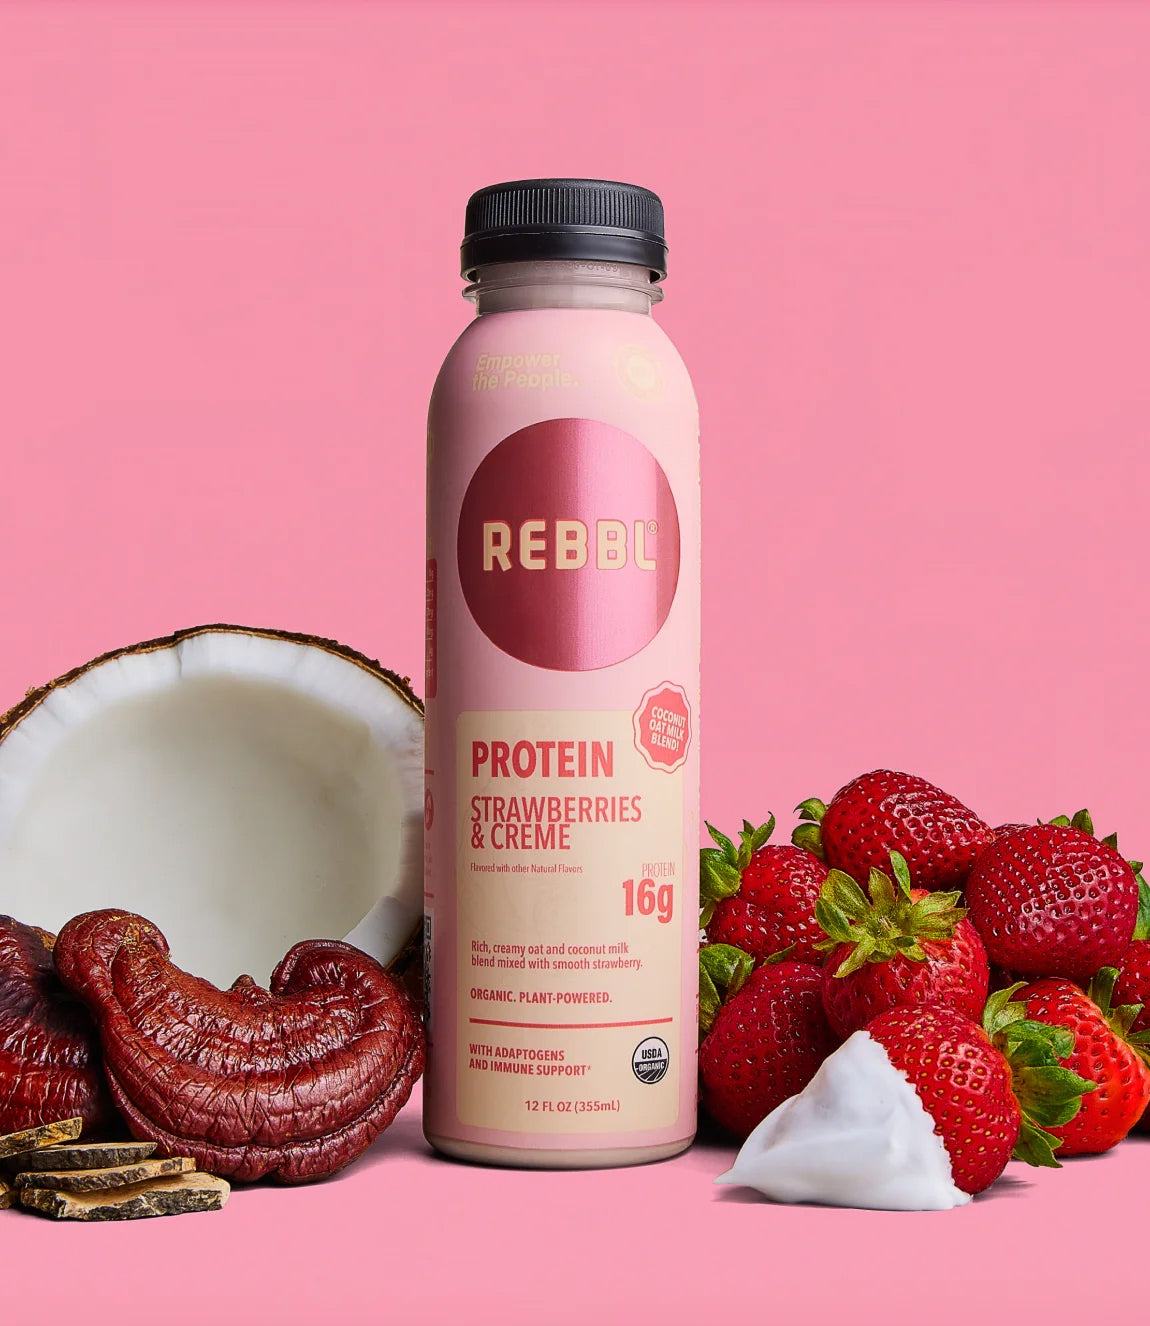 Protein Strawberries and Creme